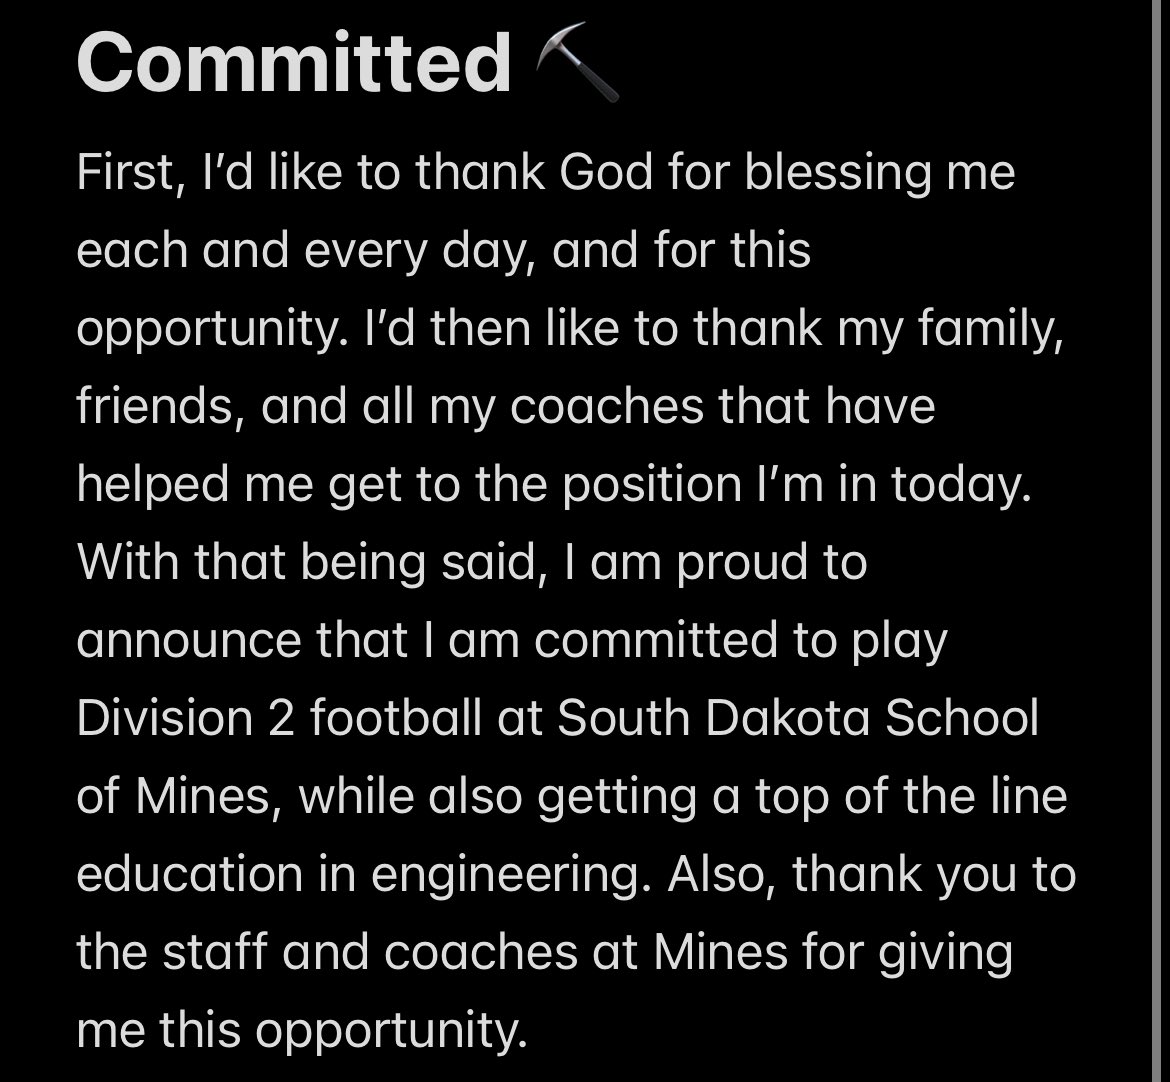 Committed!⛏️ #TheHardrockLife @CoachTTumbleson @coachflohr @Coach_Rose_23 @BCBraves